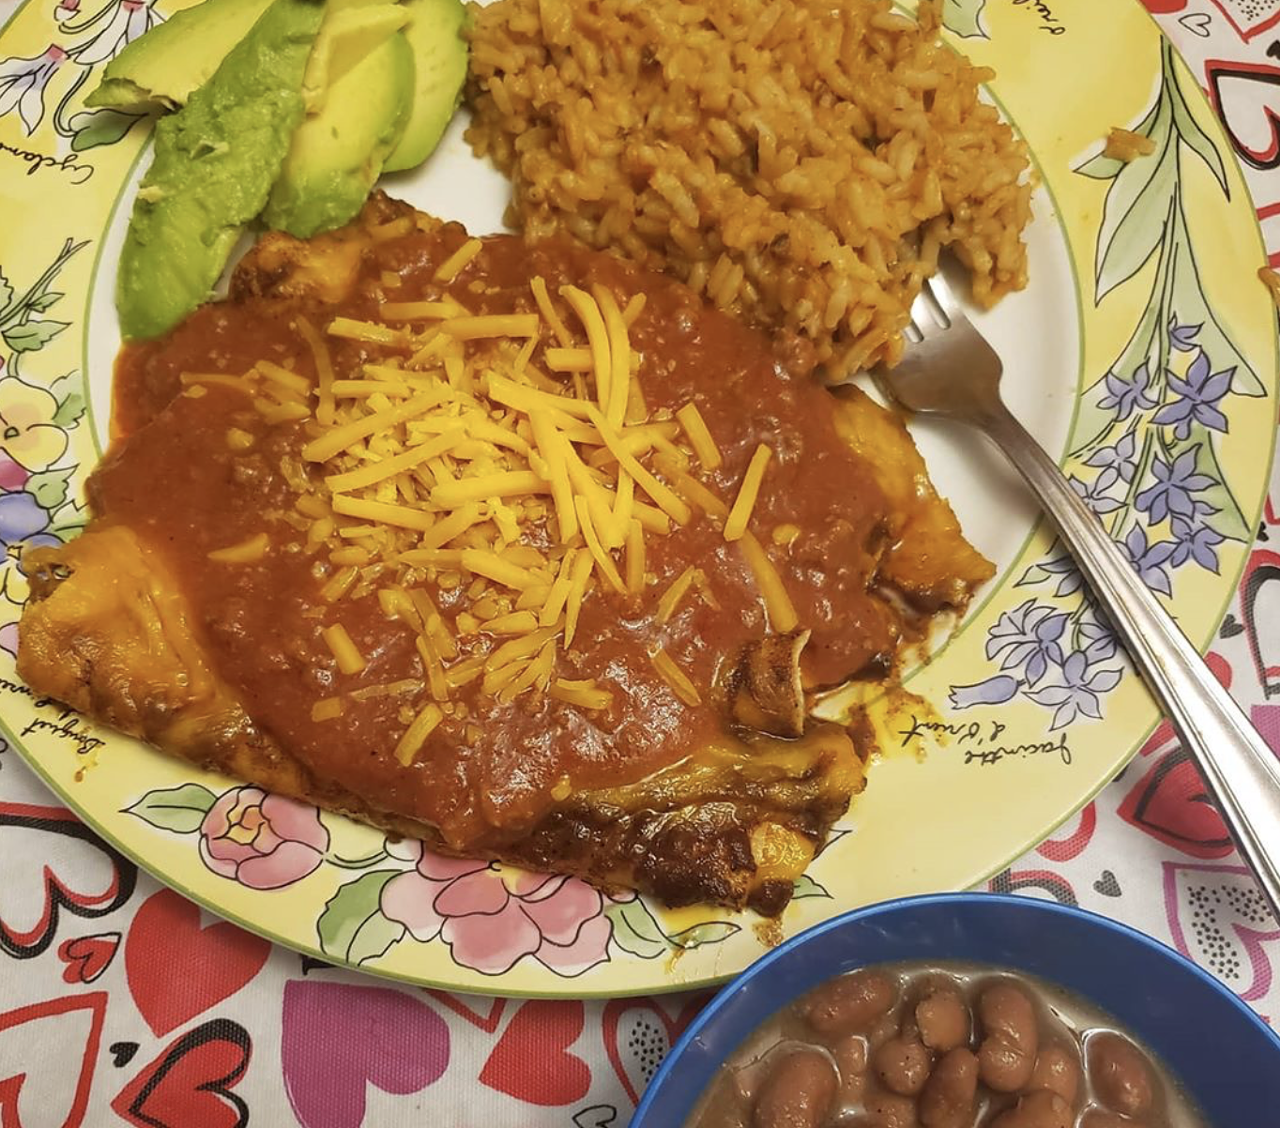 NEISD School Enchiladas
Get ready for a blast from the past with these elementary-school enchiladas, straight from the North East Independent School District.
Find the recipe here.
Photo via Instagram /  amberdinni